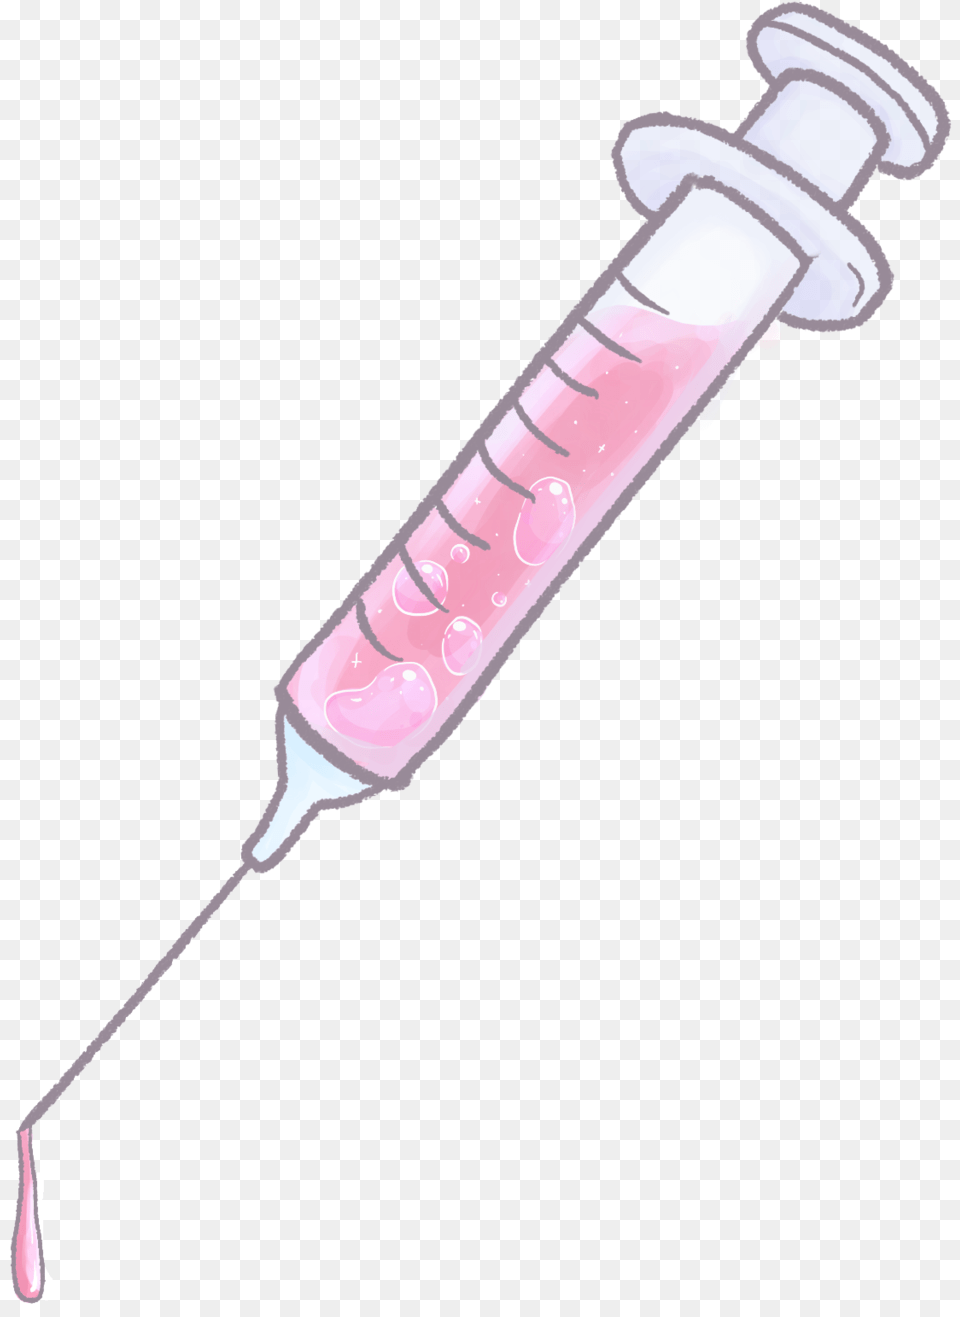 Needle Transparent Download Syringe Clipart Transparent, Injection, Dynamite, Weapon, Smoke Pipe Png Image